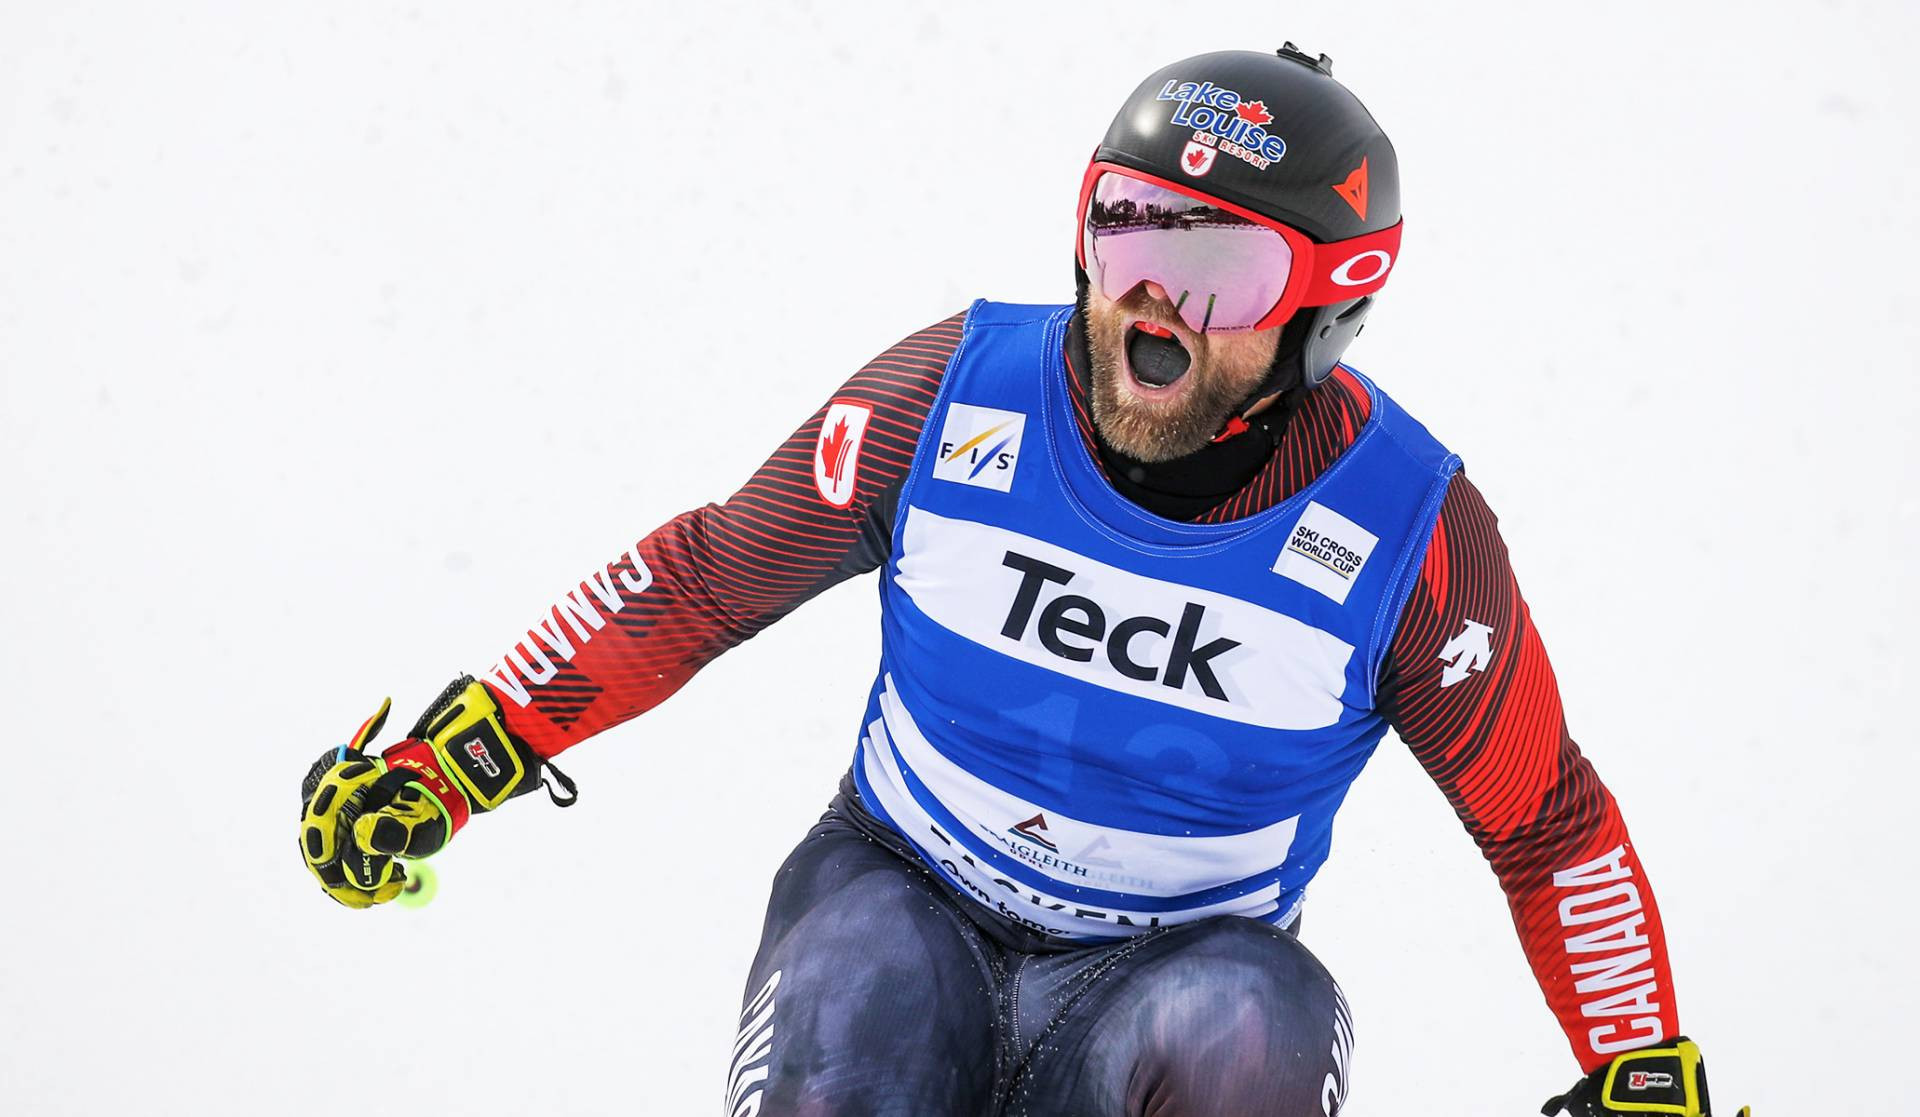 Leman ends career with victory in final FIS Ski Cross World Cup of season